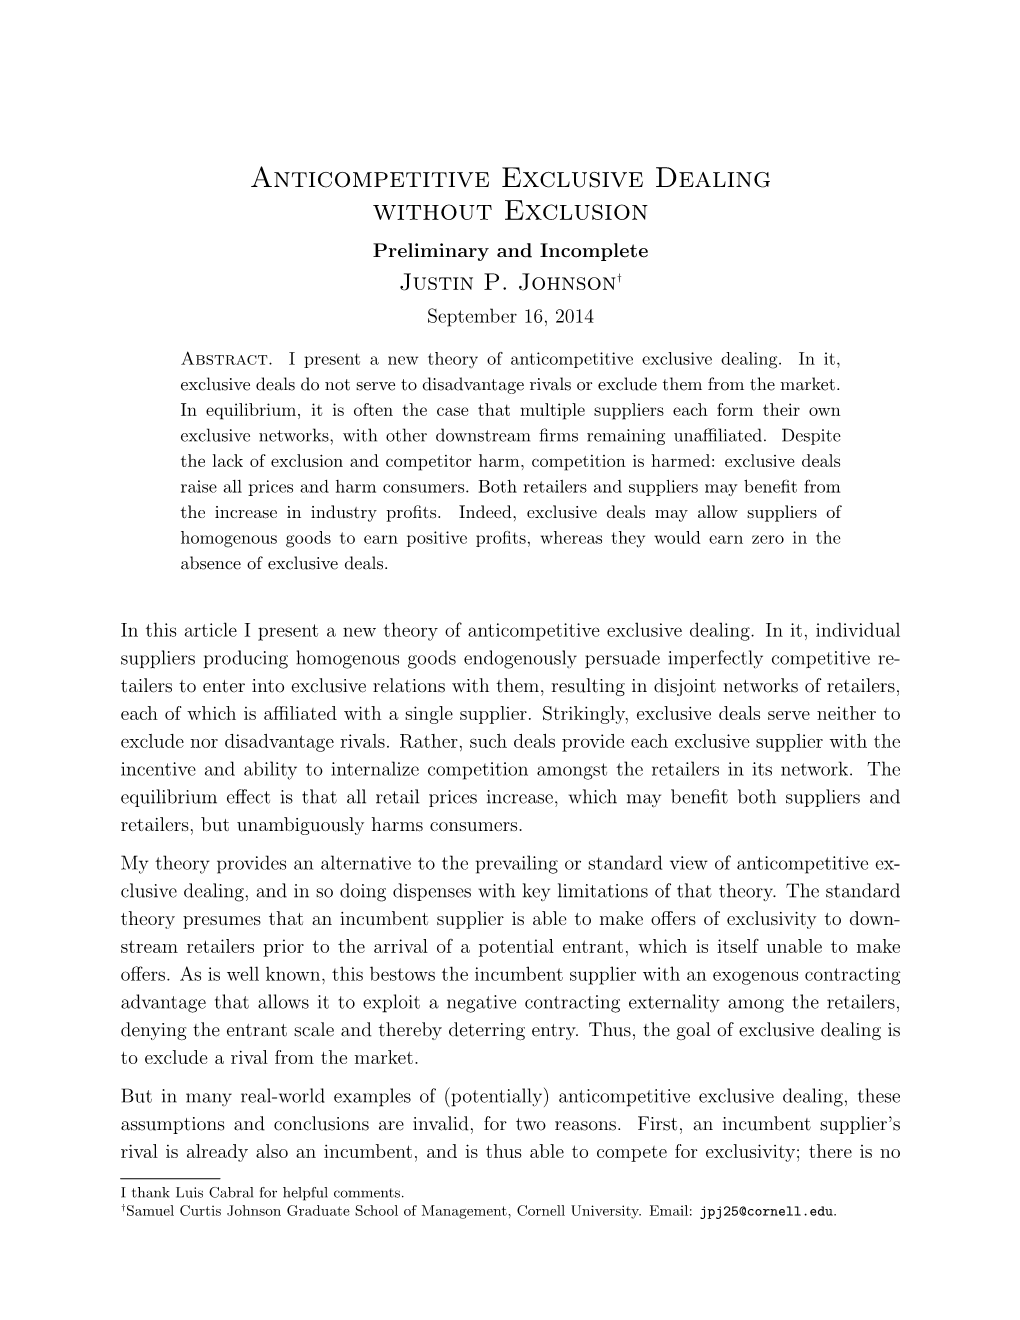 Anticompetitive Exclusive Dealing Without Exclusion Preliminary and Incomplete Justin P